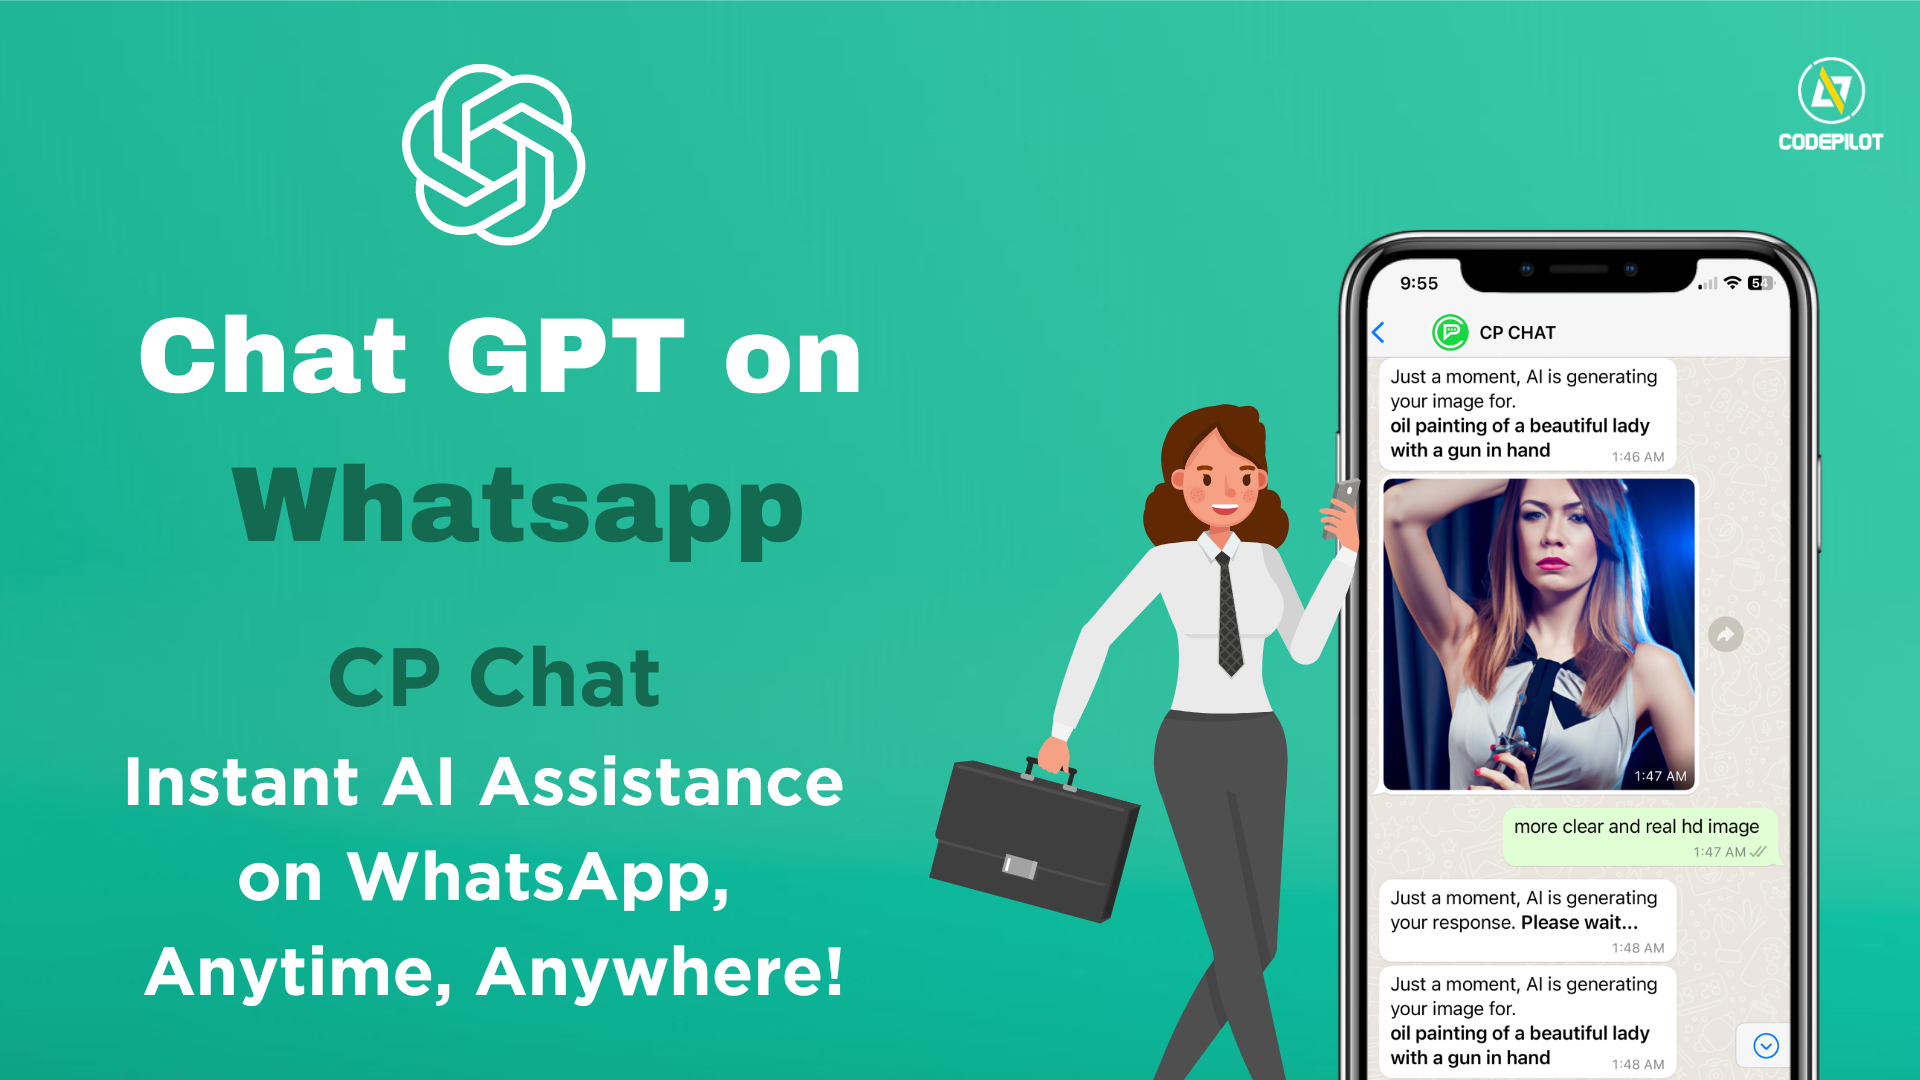 How to Use Chat GPT on WhatsApp